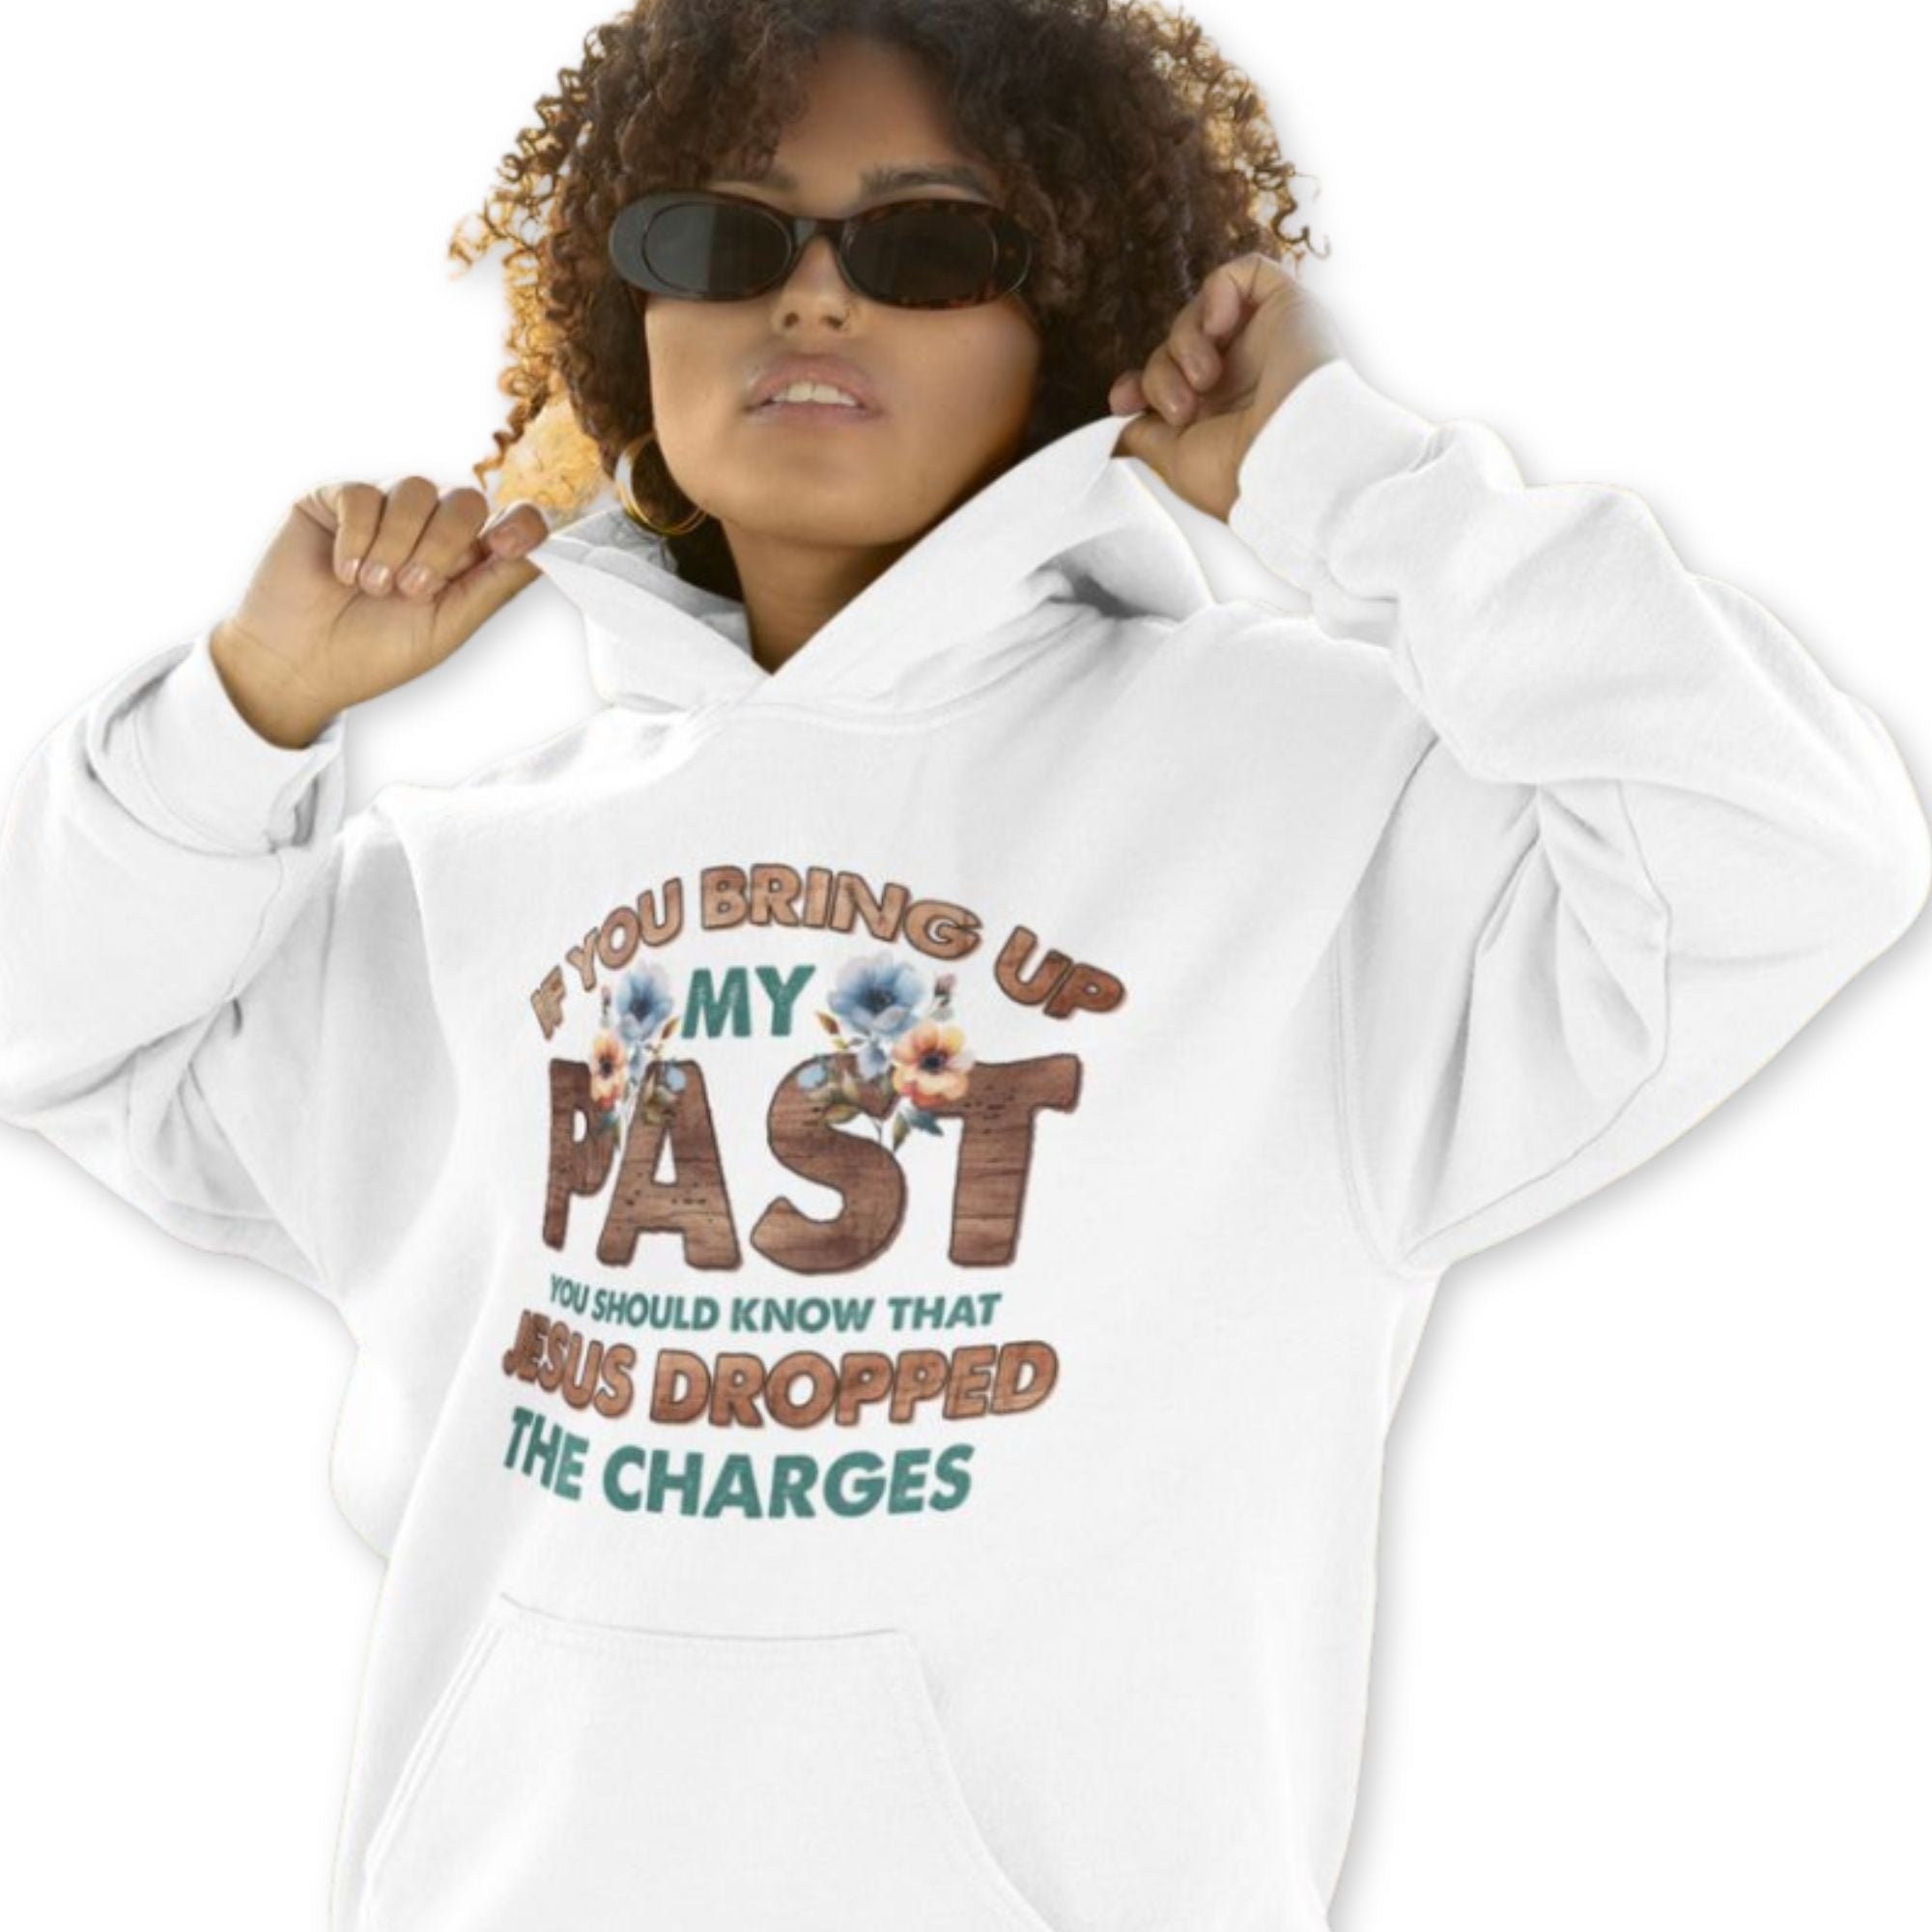 Jesus Dropped the Charges Unisex-Fit Hoodie Color: White Size: S Jesus Passion Apparel